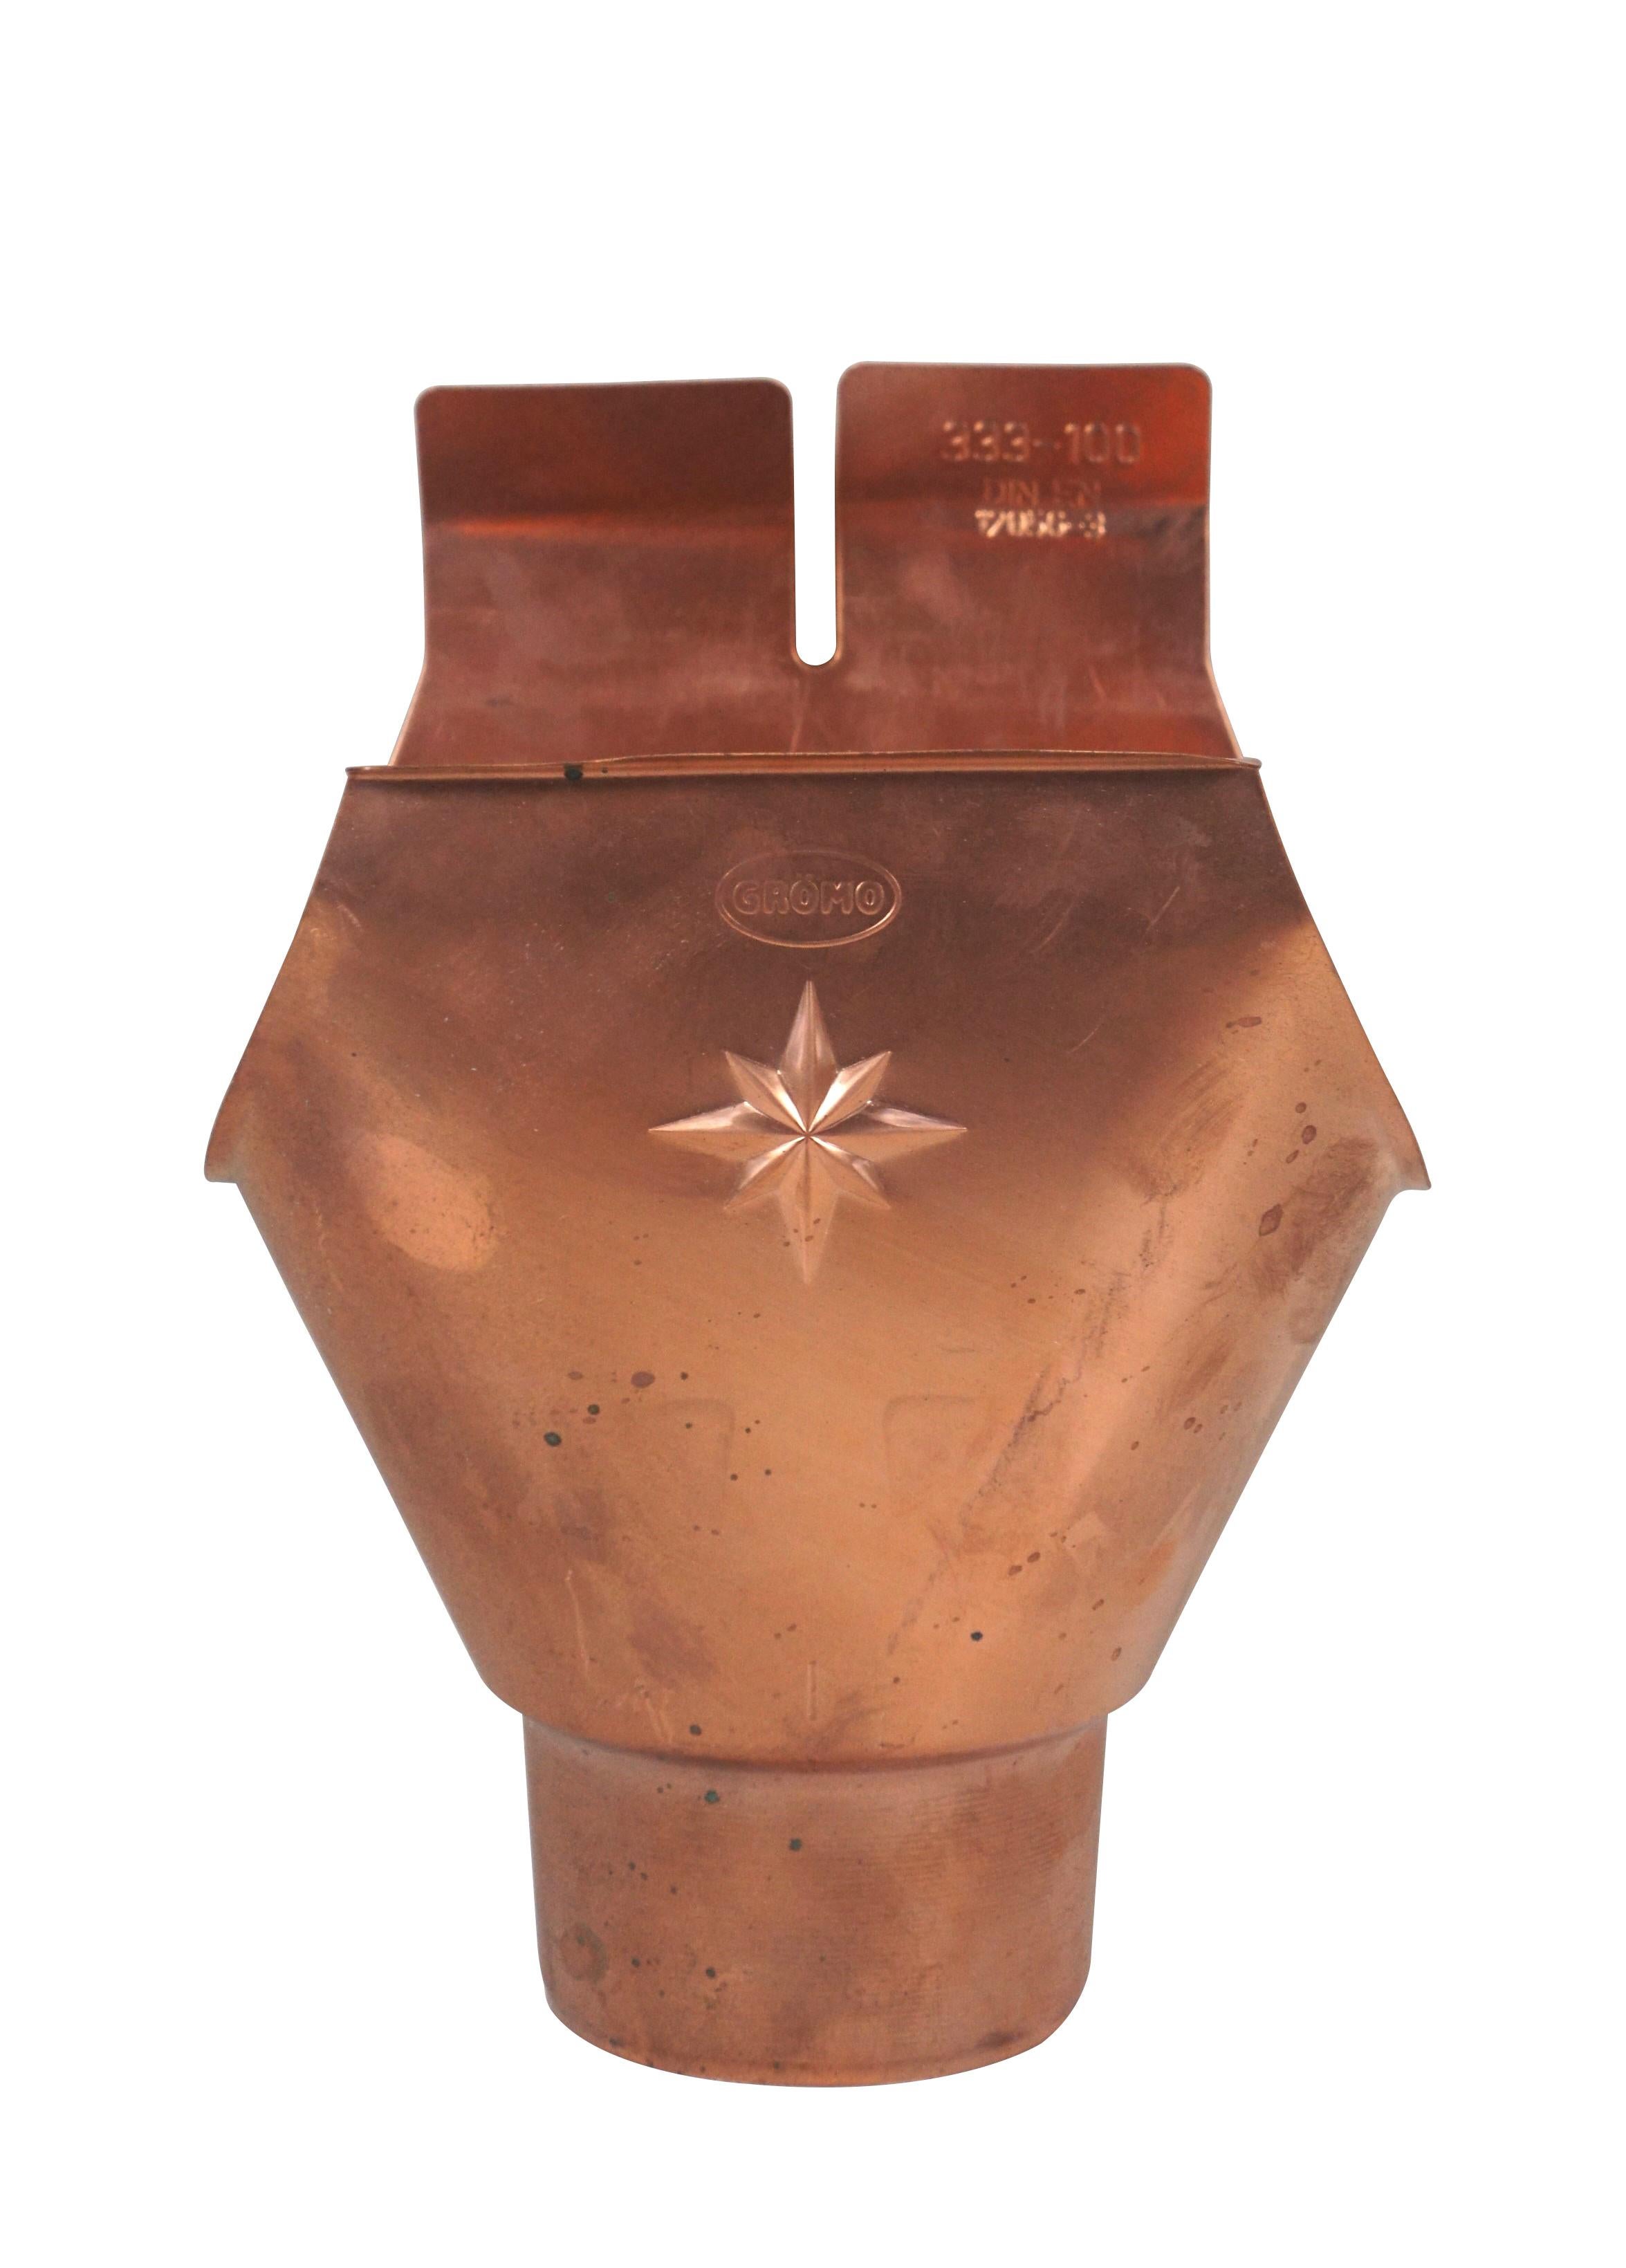 Late 20th century pair of copper downspout / gutter outlets. Includes two support brackets.

Gromo Plug-In Gutter Outlet Oval - Half Round Gutter - Number 333-100 Din En 12056-3 - Copper - 60450. Base Diameter 4